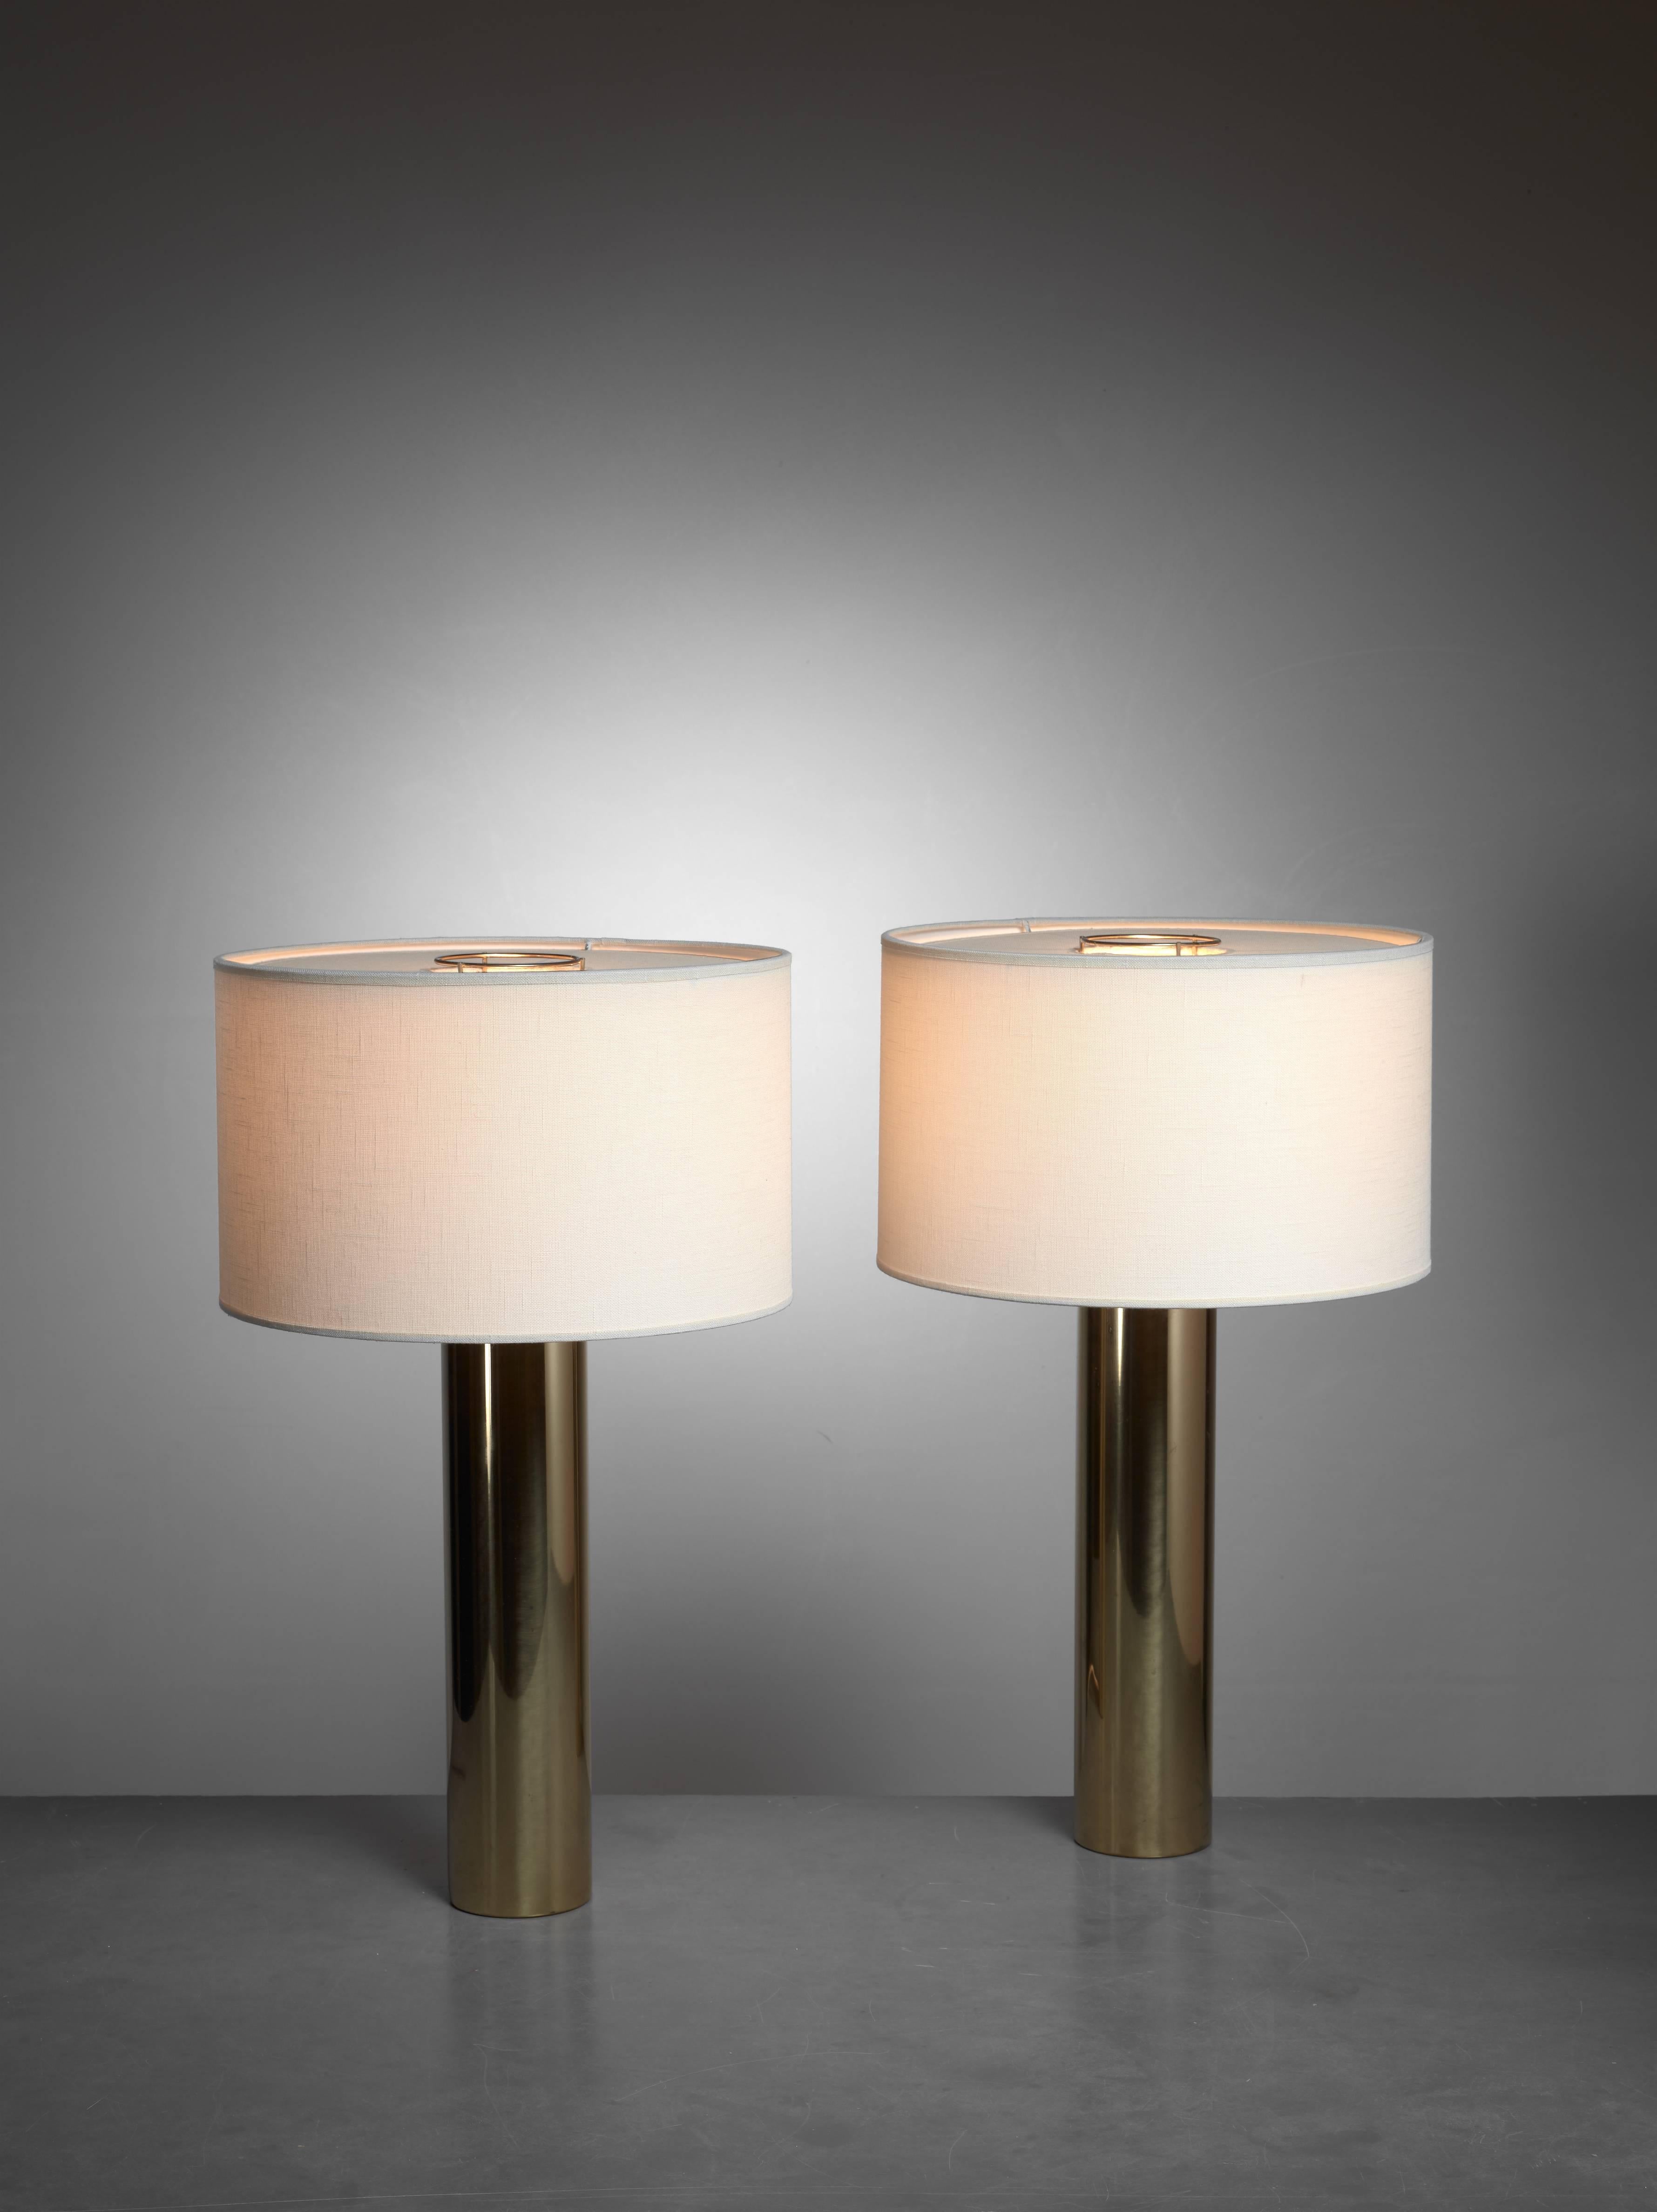 A pair of brass cylindrical table lamps by Falkenberg, Sweden. A beautiful rich and minimalistic set. A very beautiful base that can be tailored to the room by adjusting the color or shape of the shades.

The measurements stated are of the lamps